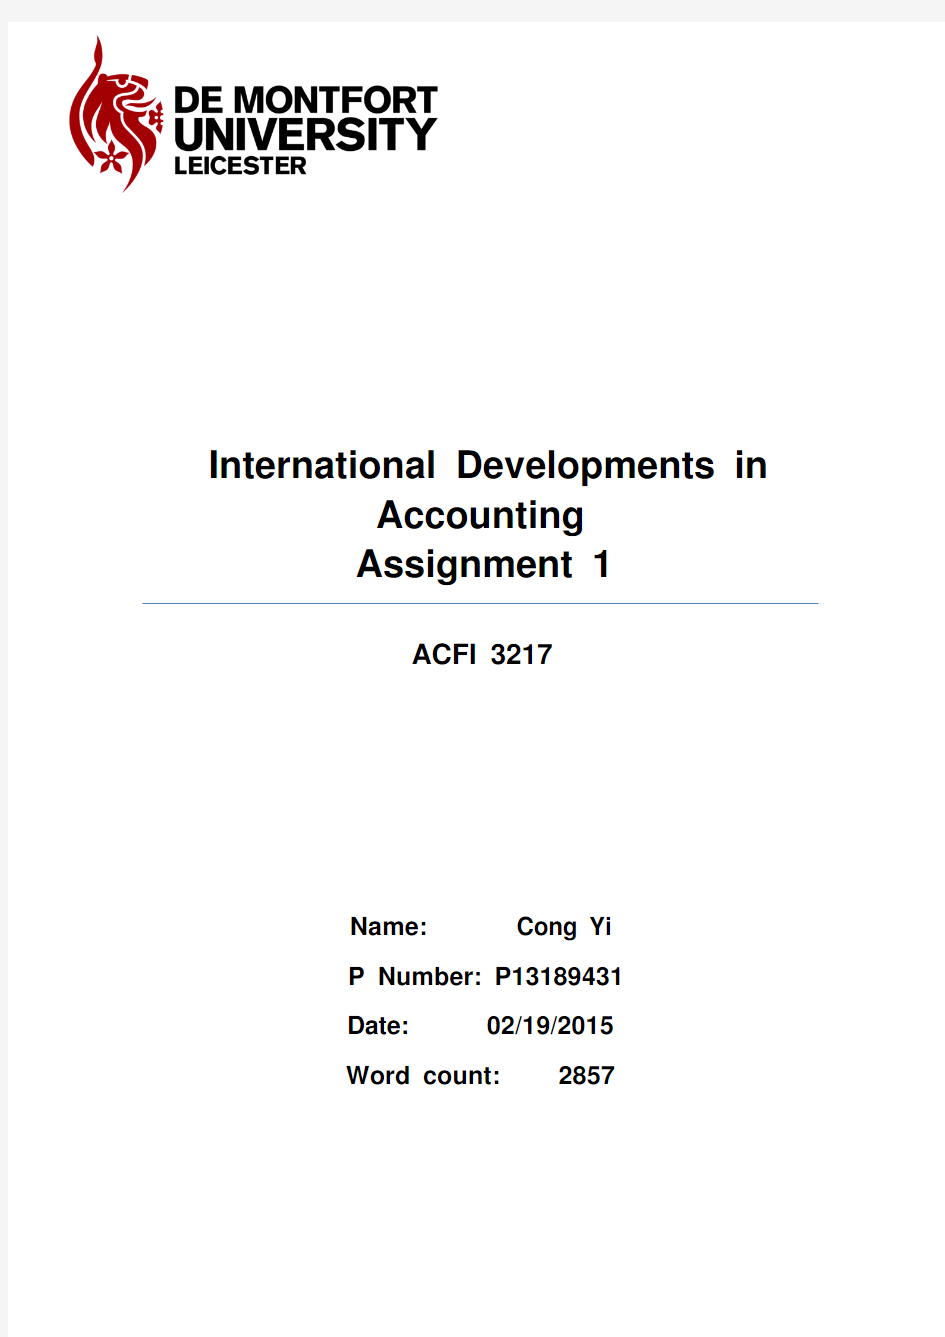 International Developments in Accounting Assignment 1